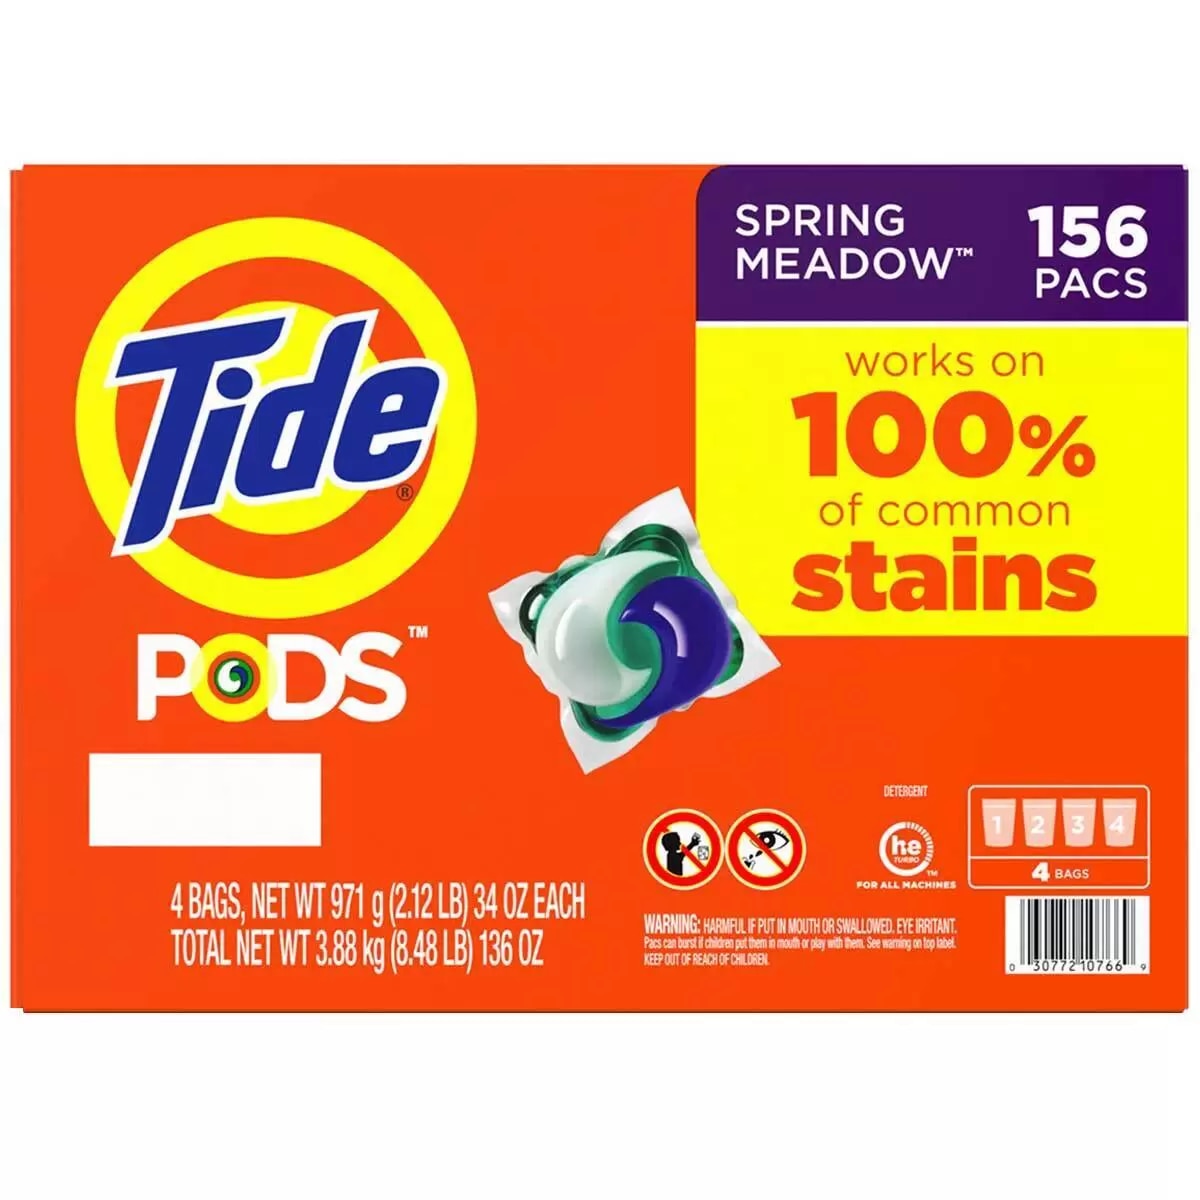 Tide PODS Spring Meadow 156 Count